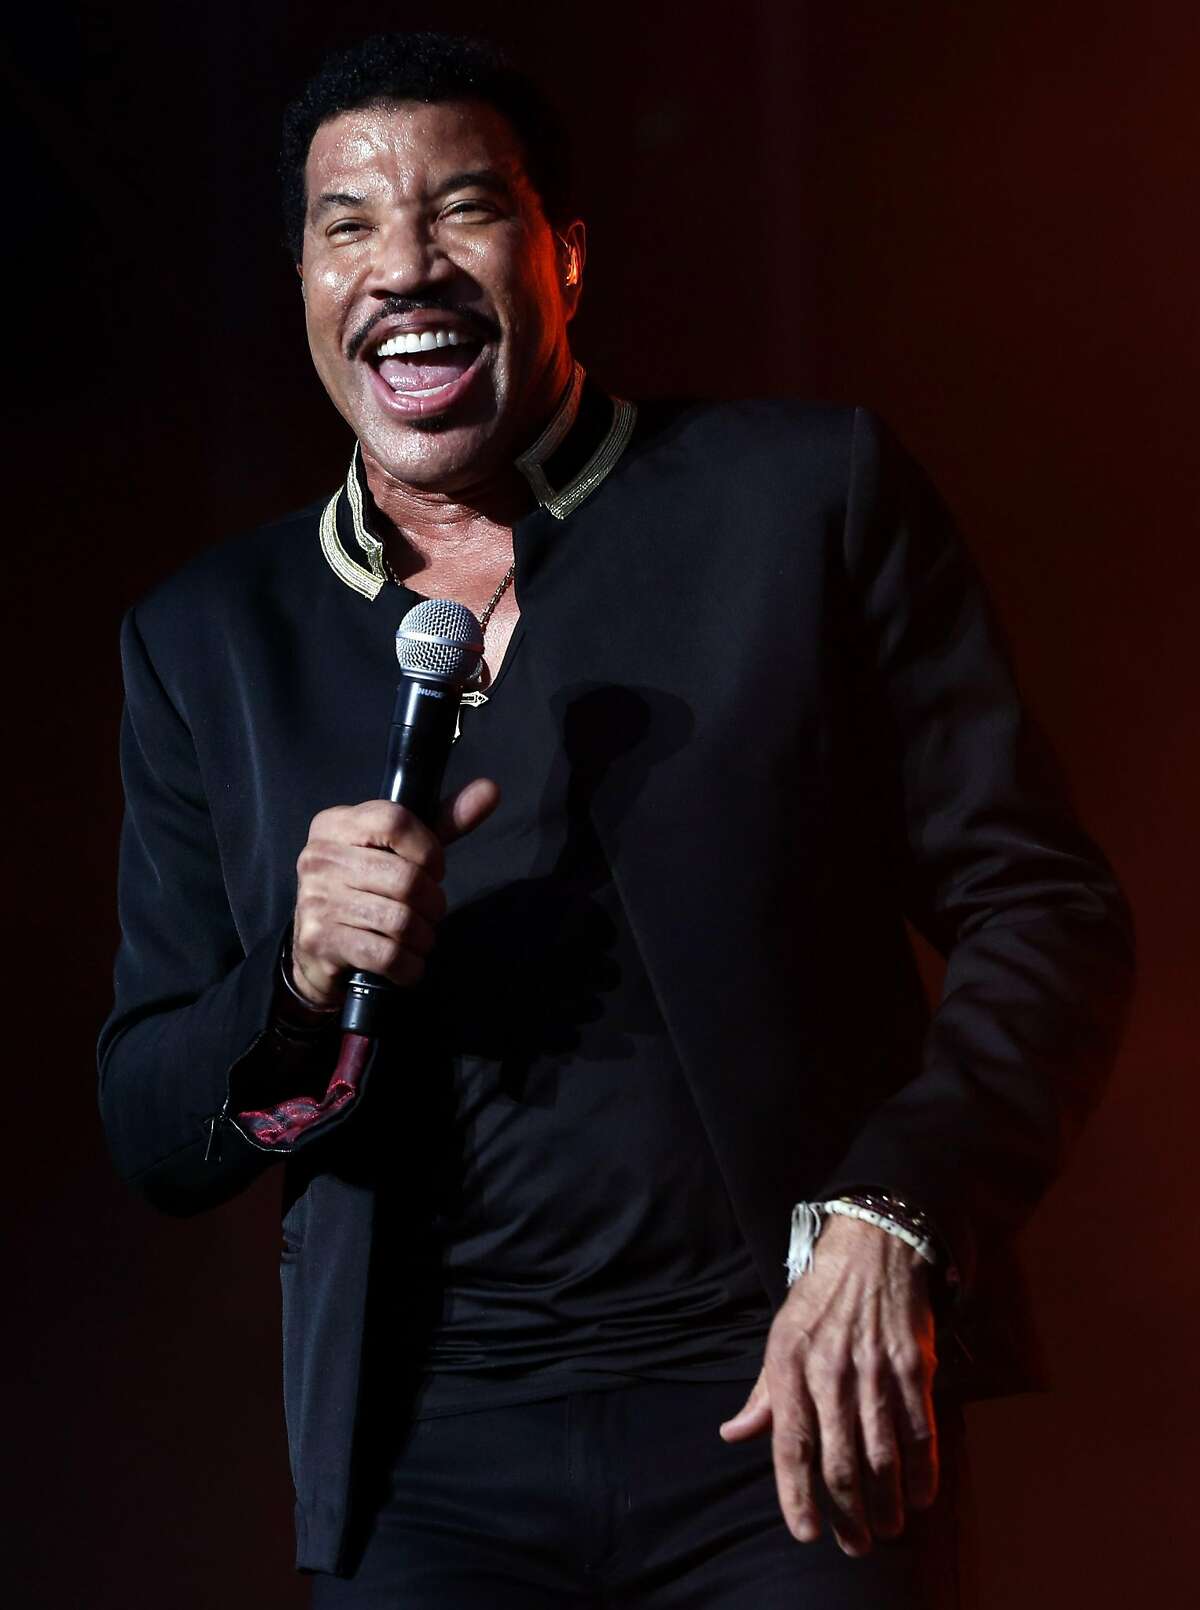 Lionel Richie performs at Outside Lands in Golden Gate Park in San Francisco, California, on Sunday, August 7, 2016.